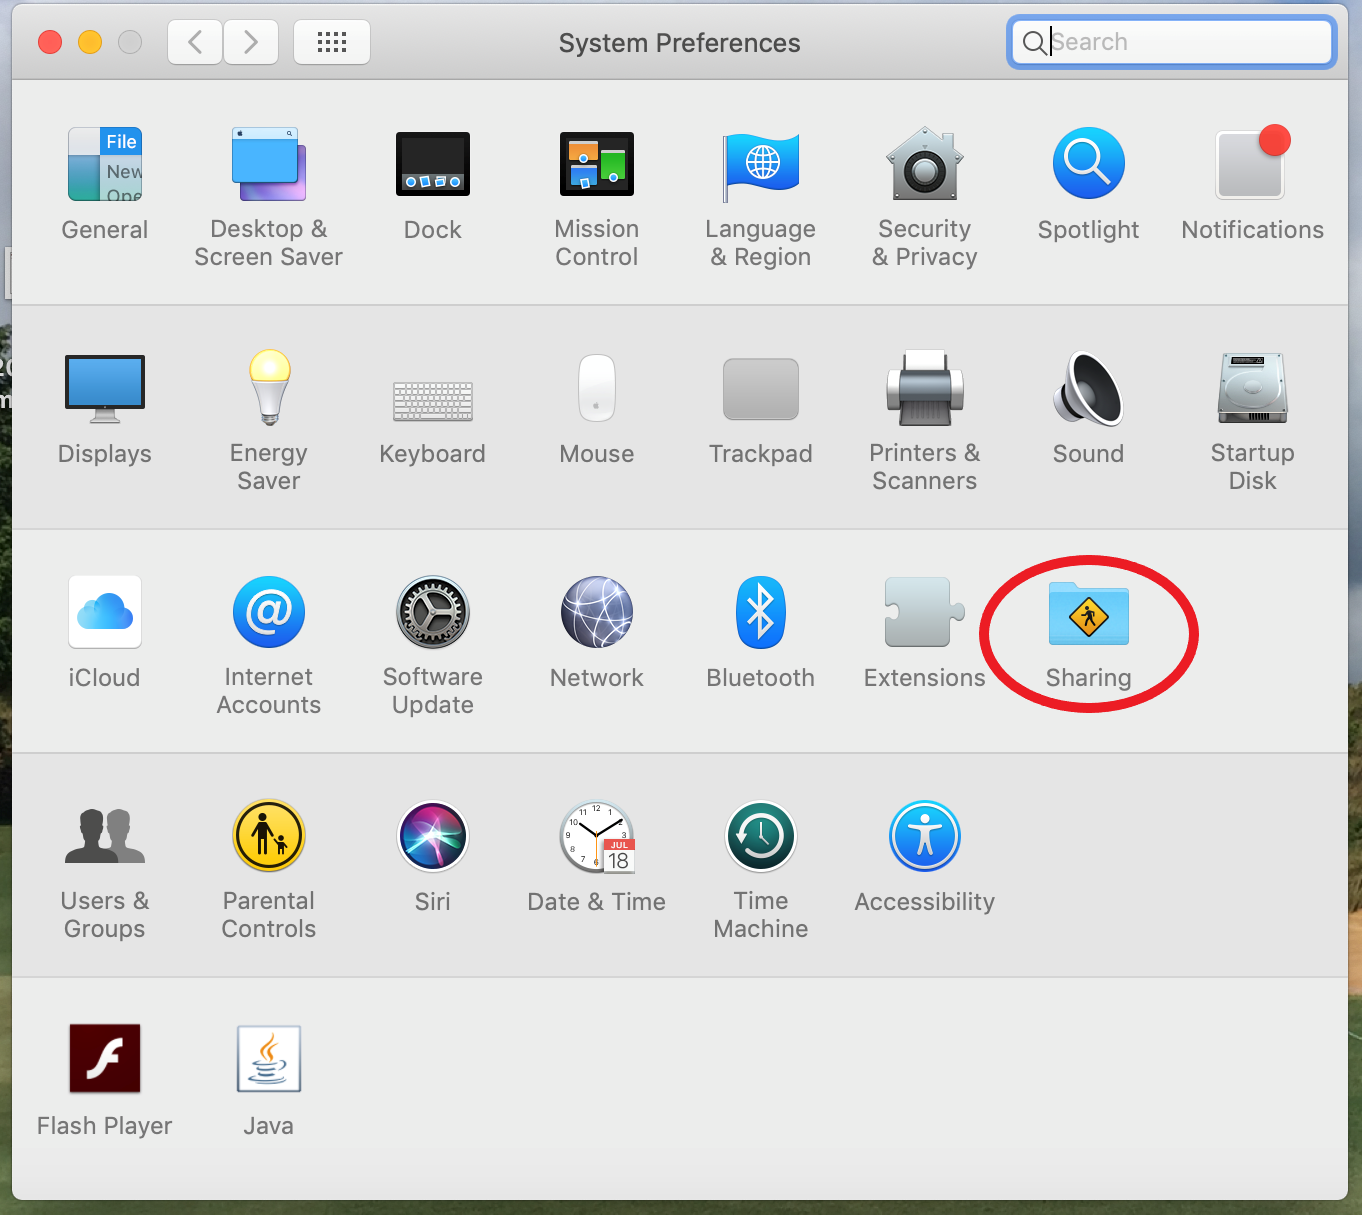 The System Preferences panel is open, and the third row has sharing highlighted